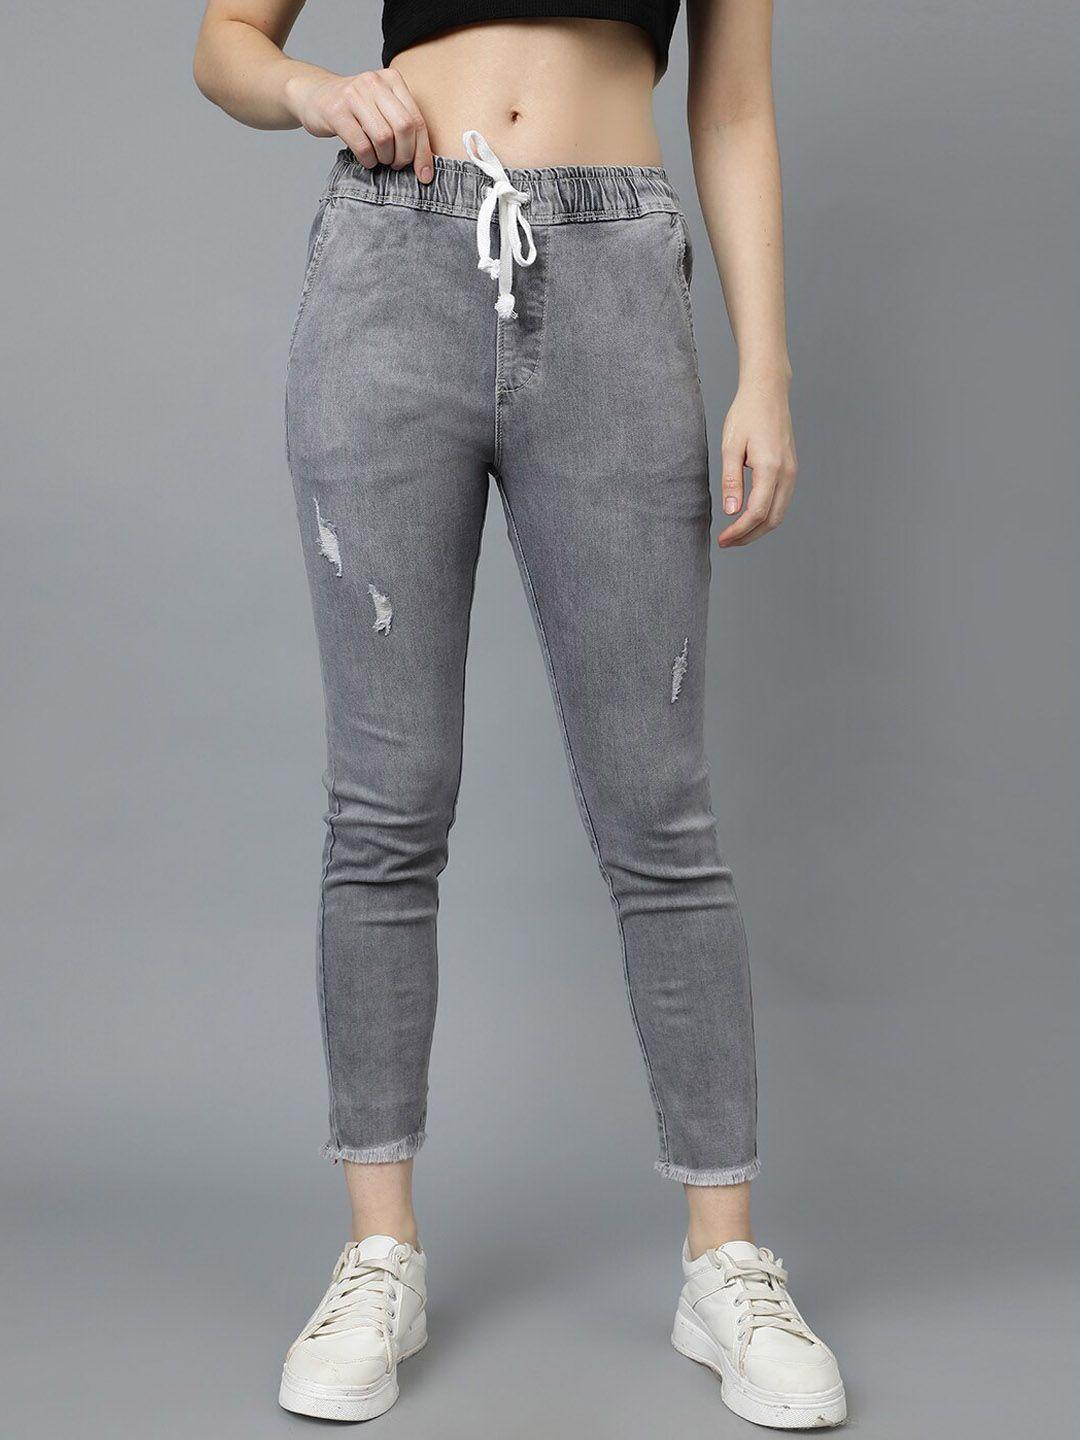 code 61 women mildly distressed light fade stretchable denim joggers